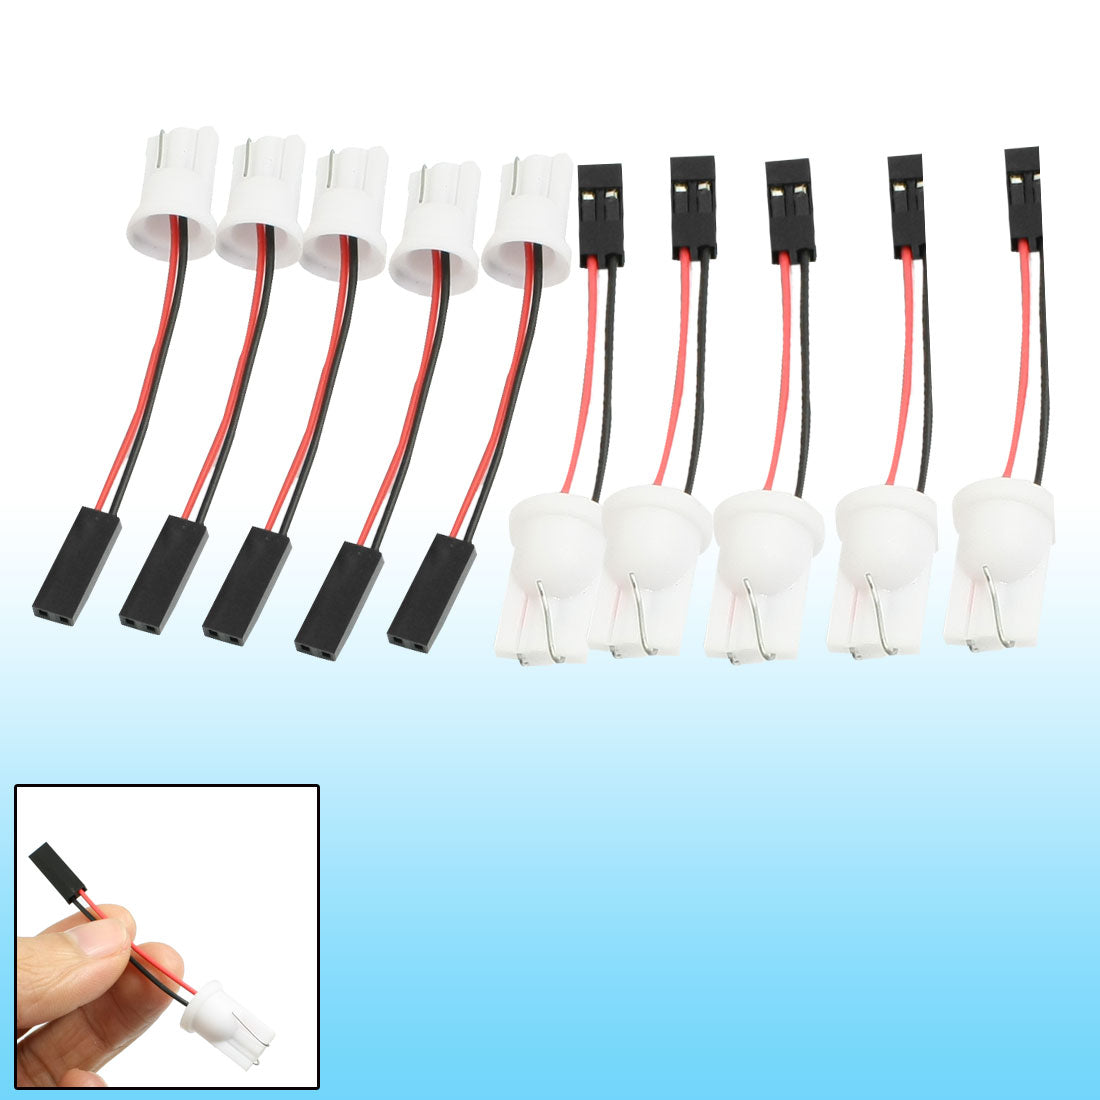 uxcell Uxcell DC 12V Truck Car Auto T10 W5W LED Bulb Light Wire Harness Adapter 10 Pcs